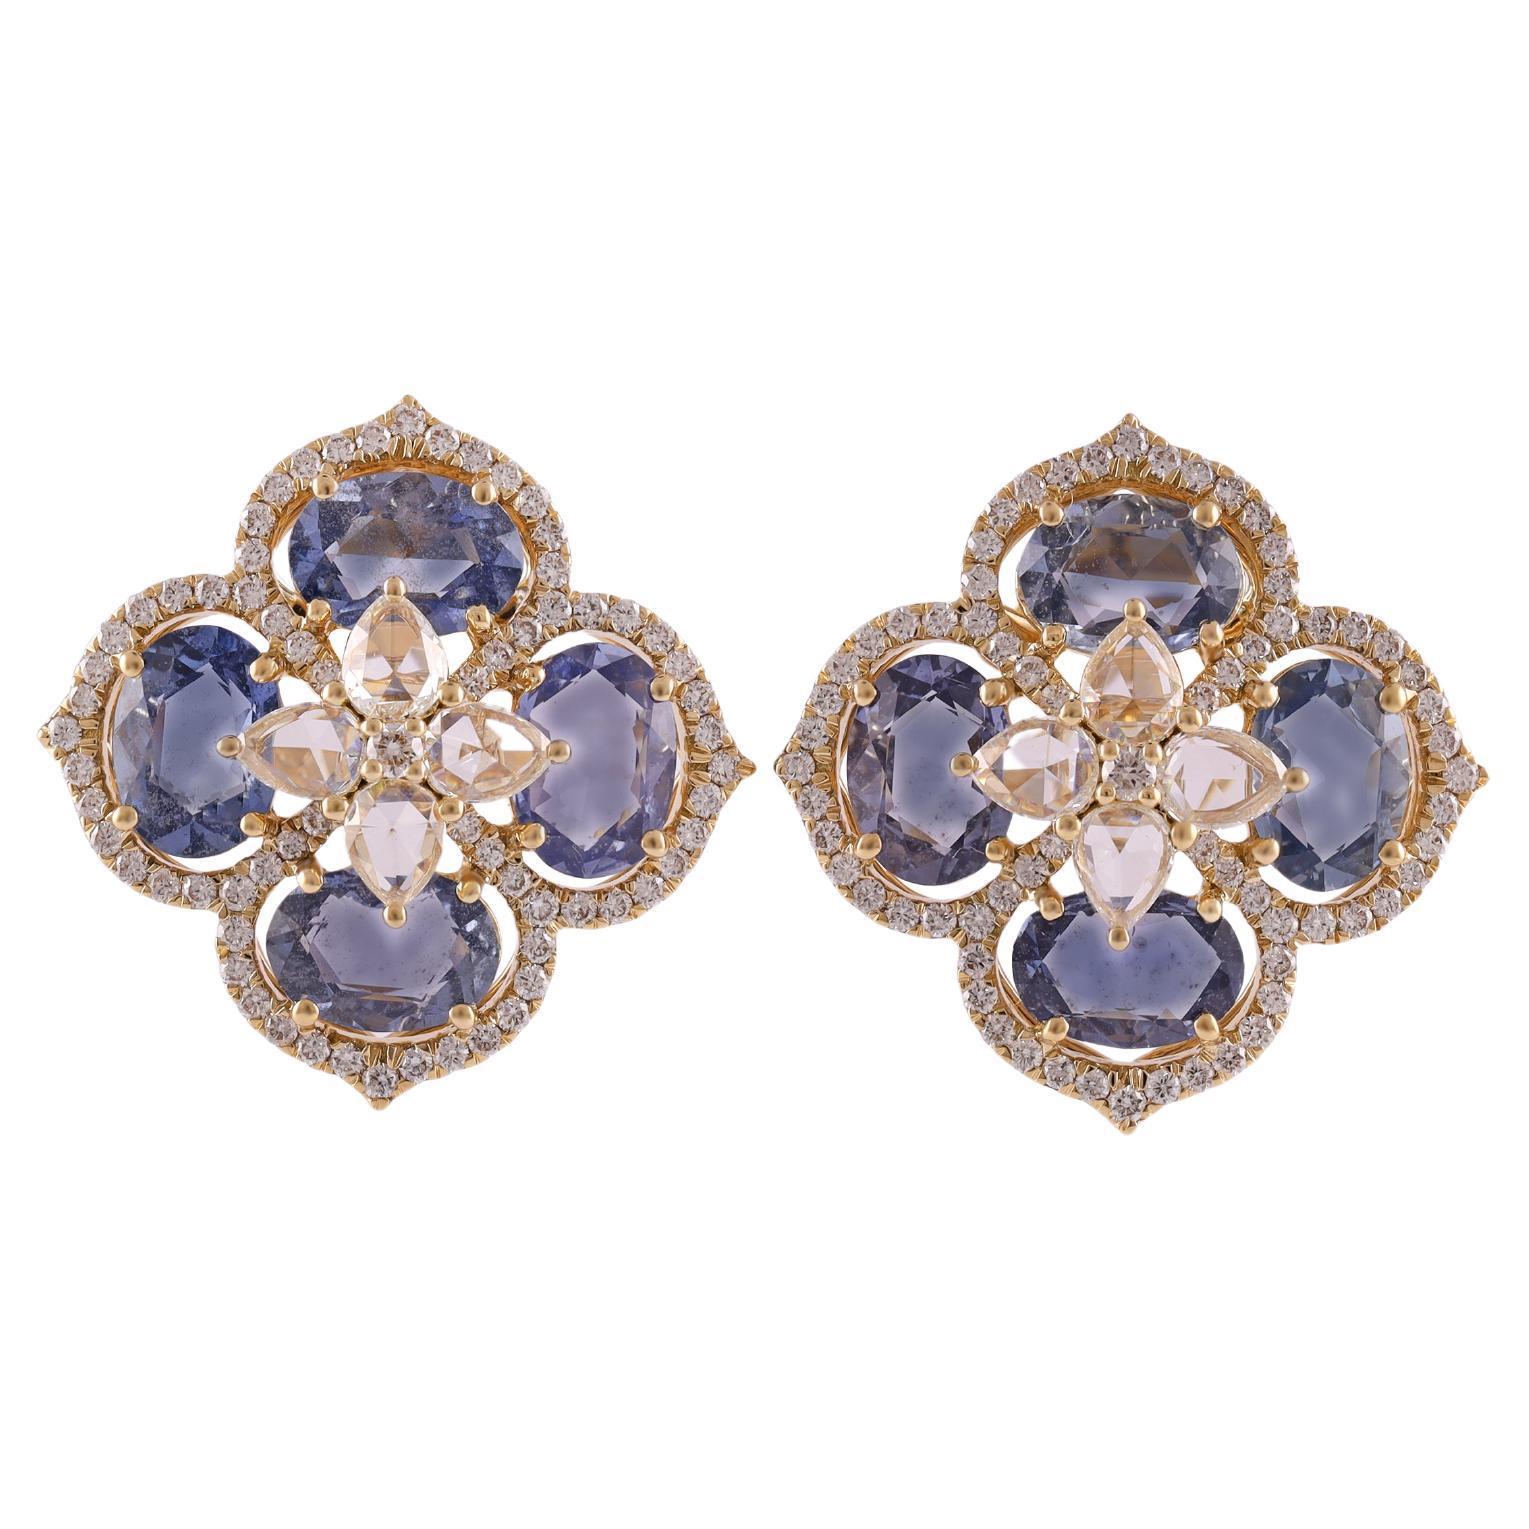 6.09 Carat  Blue Sapphire Earrings in Yellow Gold with Diamonds. 